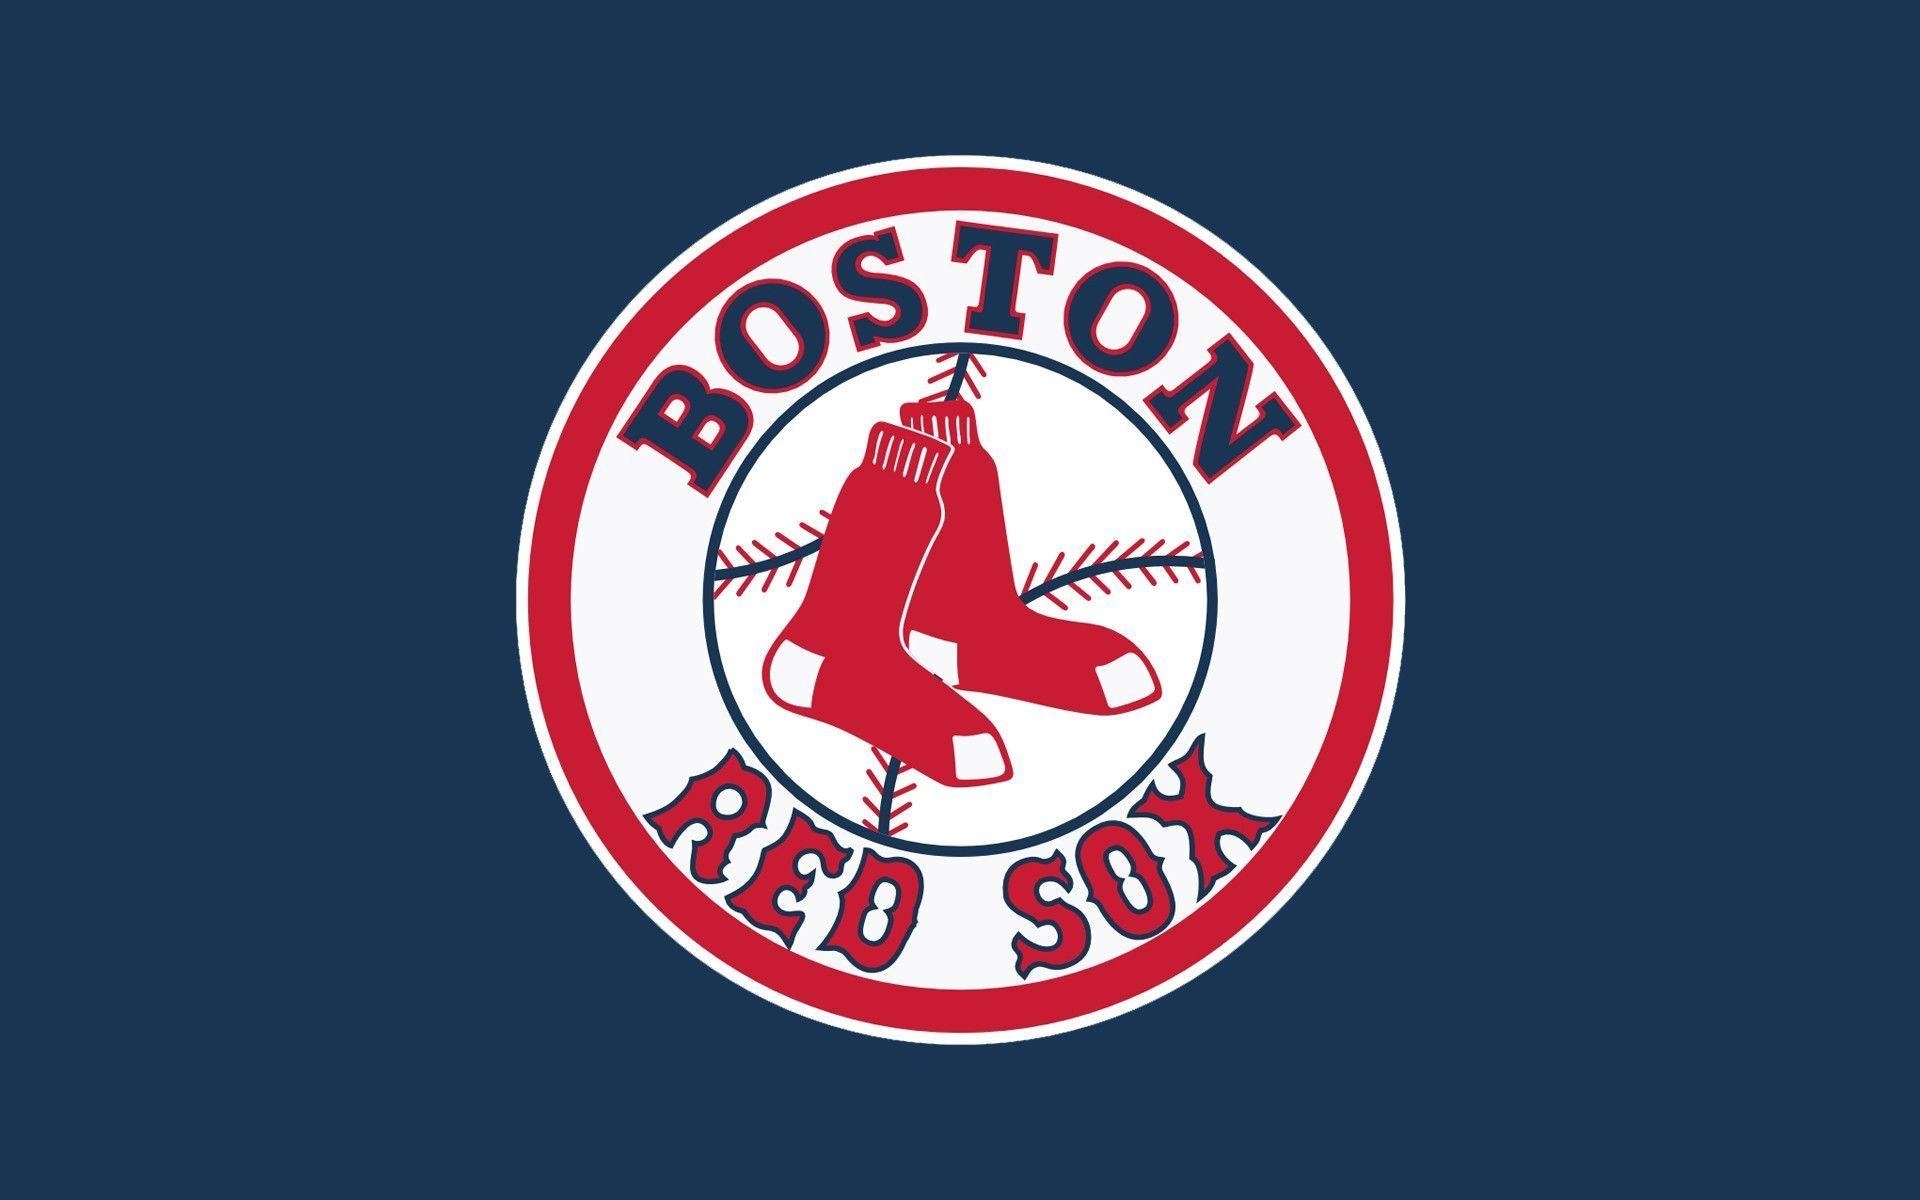 10 Latest Boston Red Sox Hd Wallpaper FULL HD 1920×1080 For PC Background